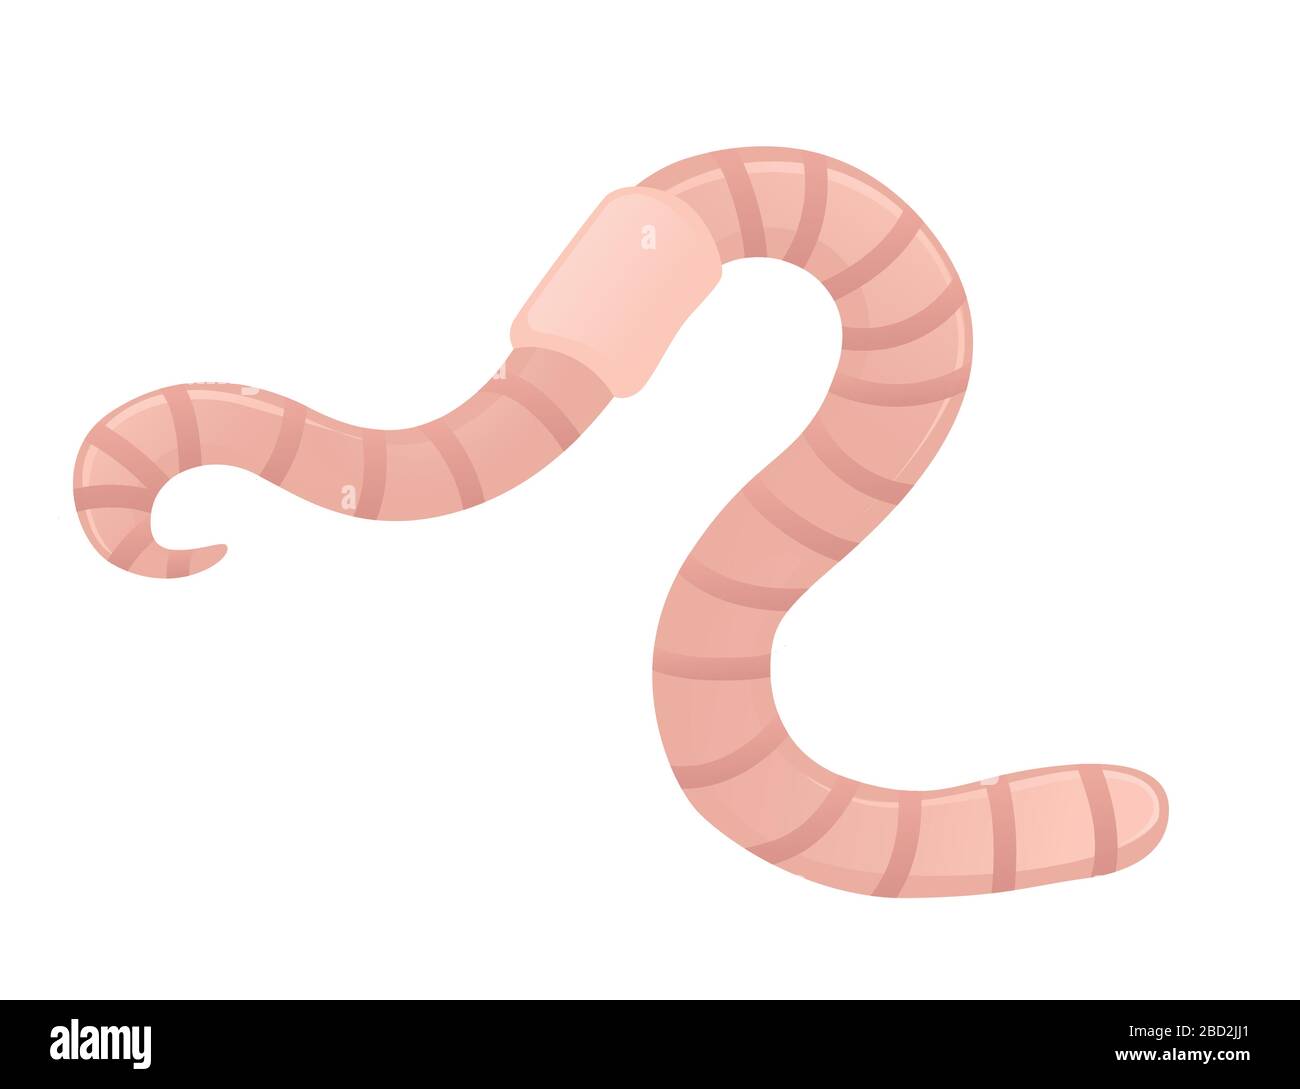 Earthworm crawling cartoon worm design flat vector illustration isolated on white background Stock Vector